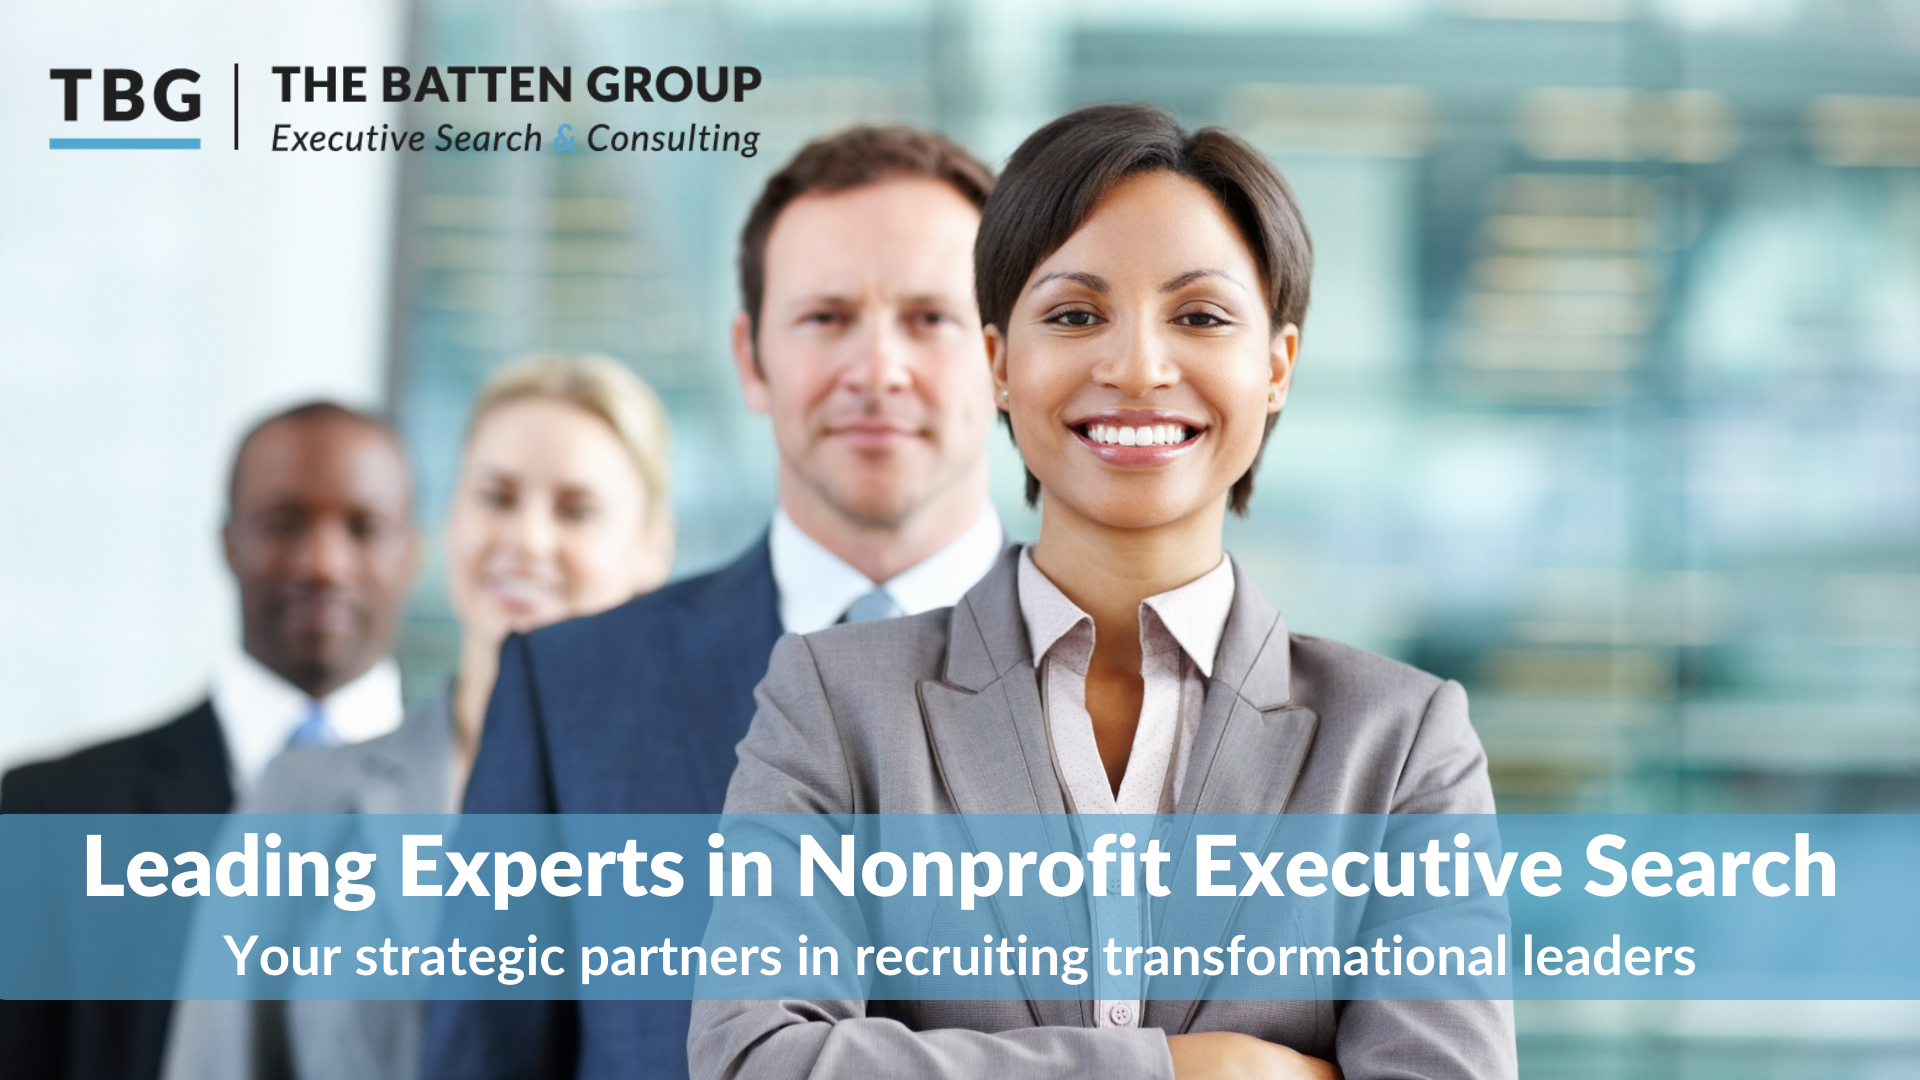 The Batten Group - Executive Search and Consultancy is NOT The Batten Group of TX